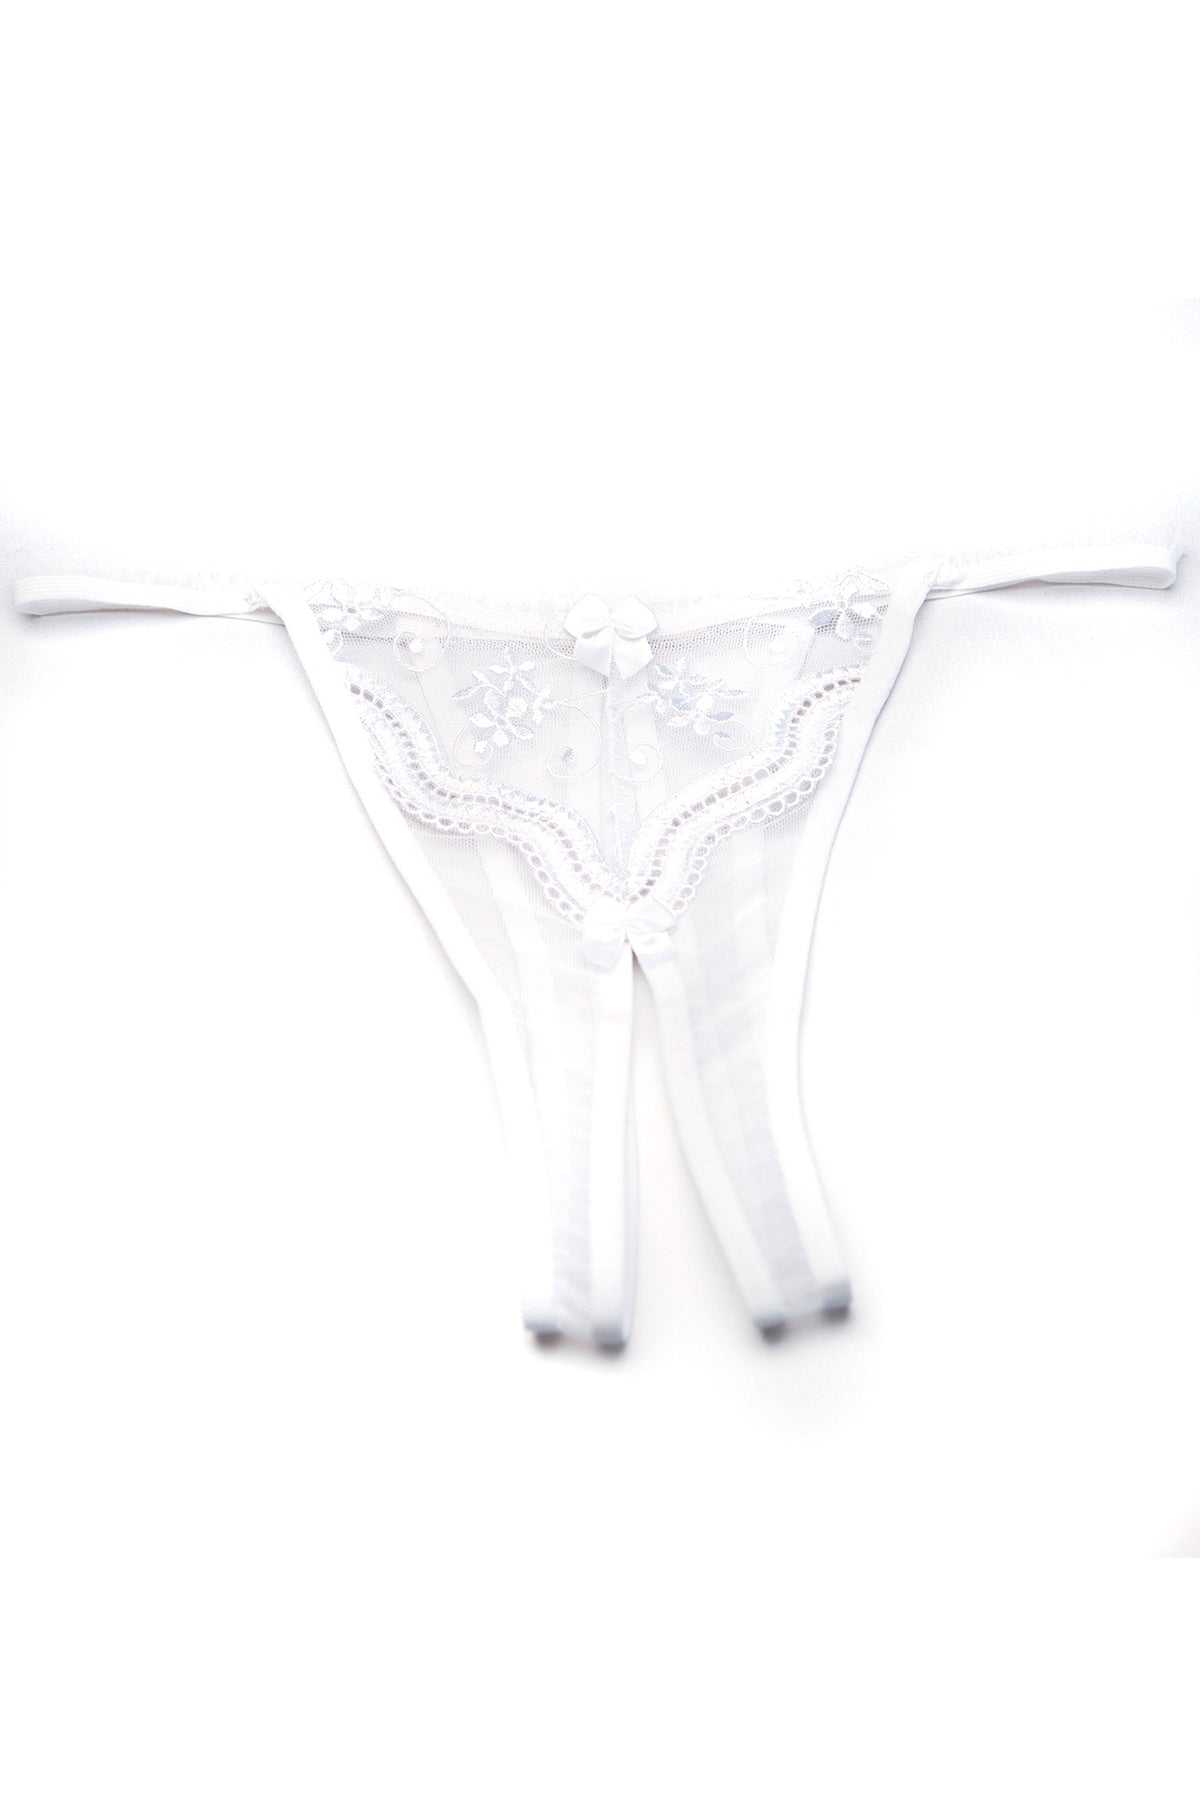 Missguided scallop lace thong in white